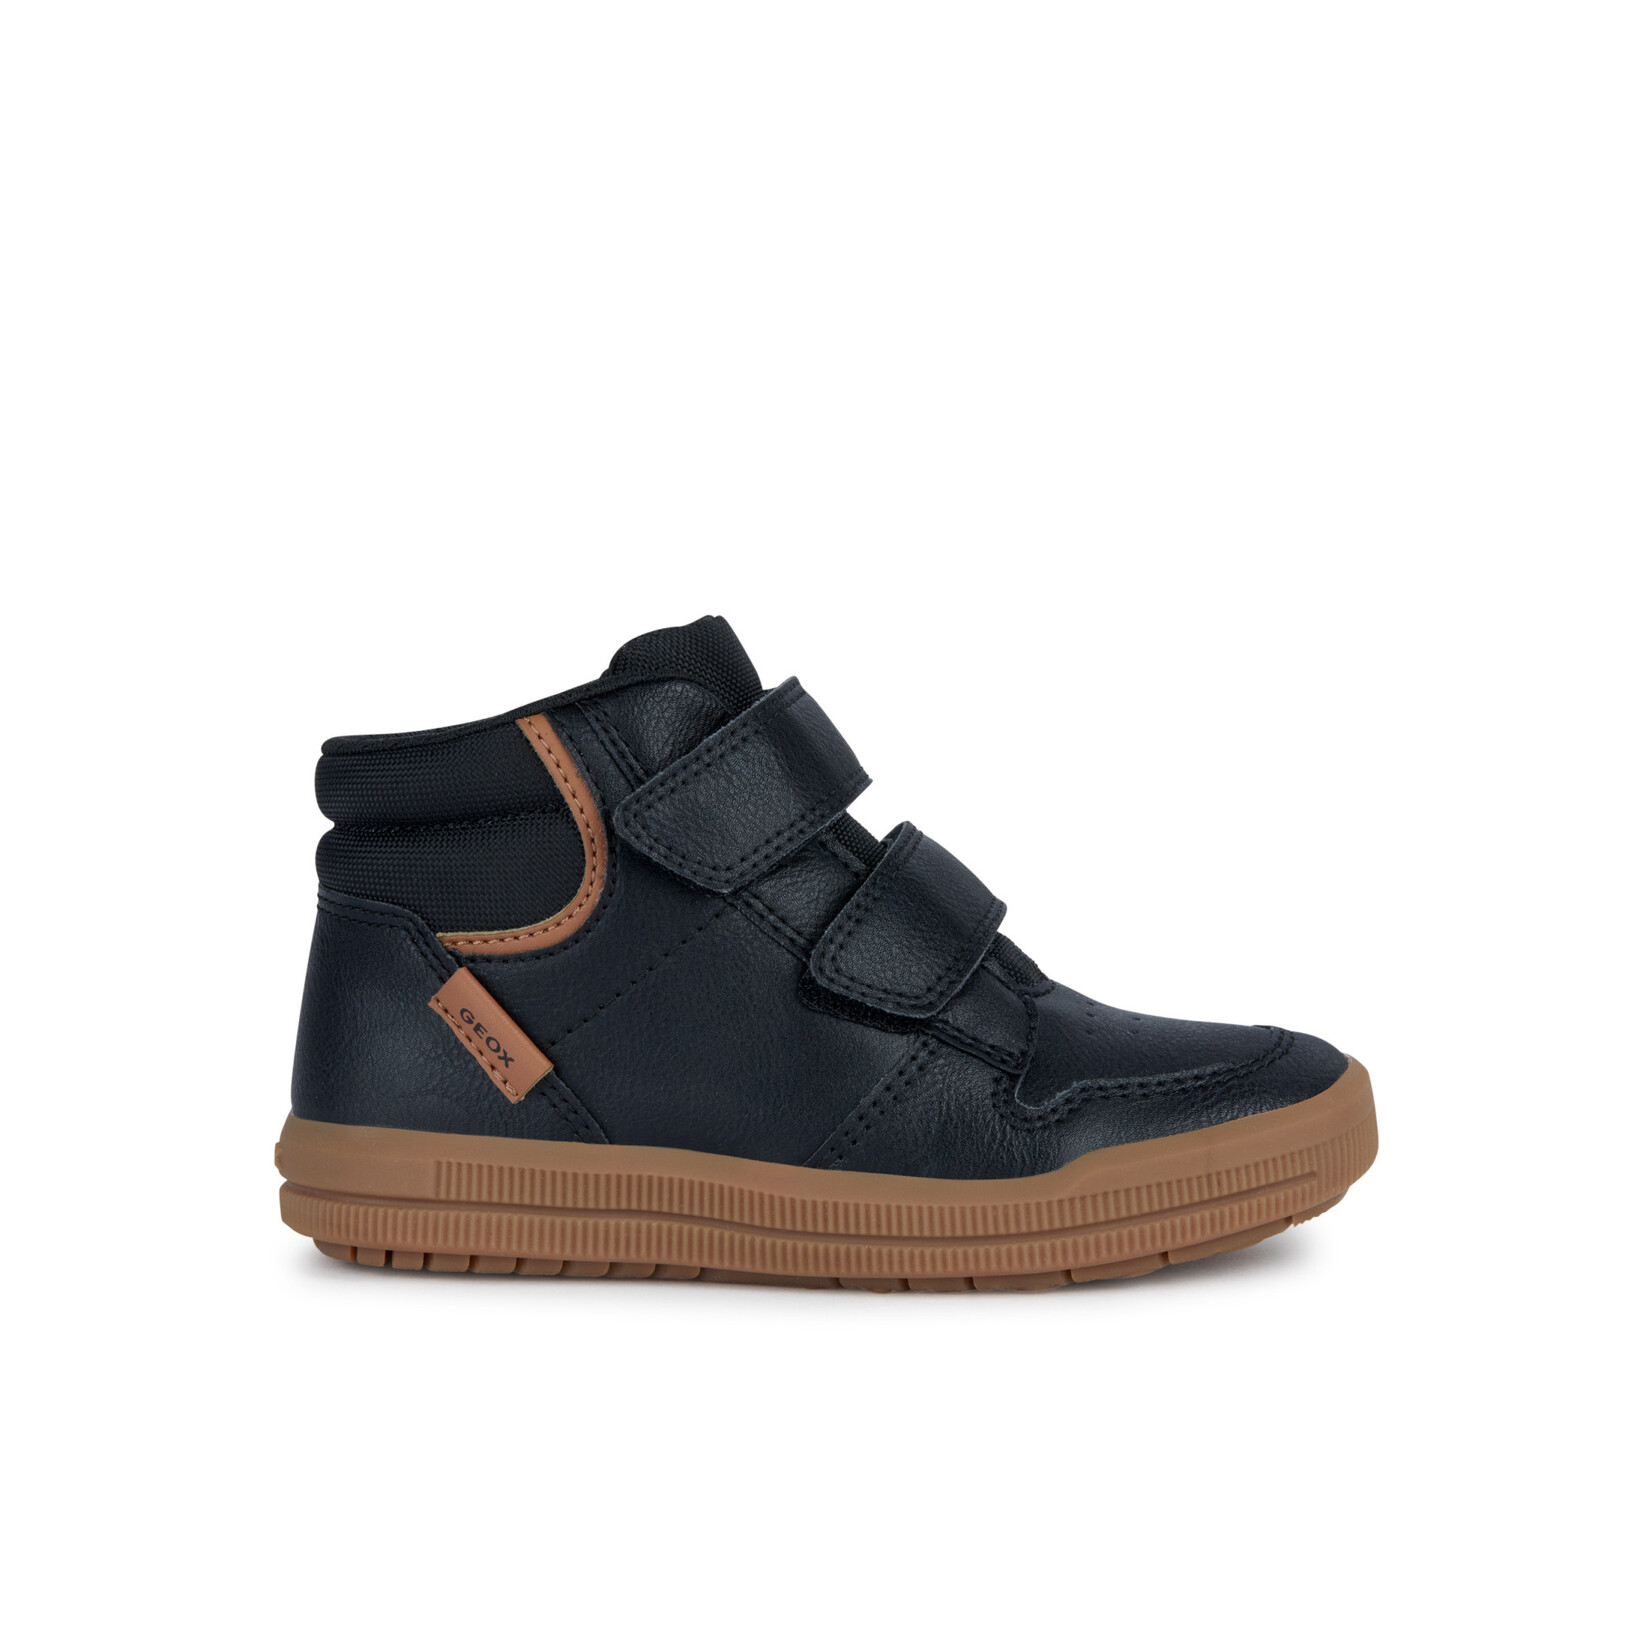 Geox GEOX - High-top Synthetic Leather Sneakers 'J. ARZACH' - Black/Cognac